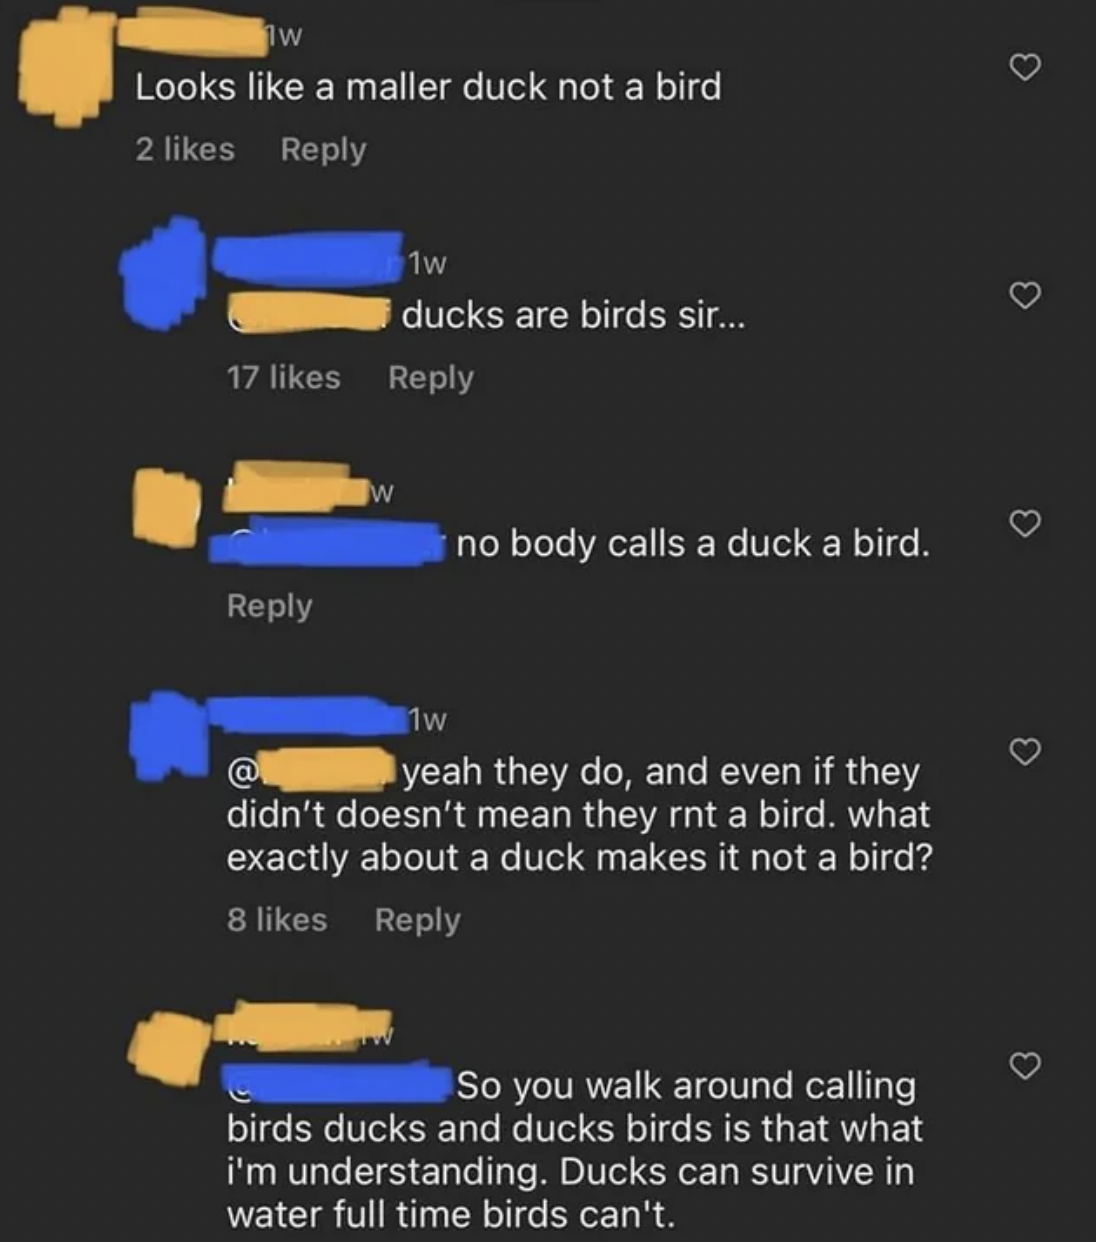 screenshot - Looks a maller duck not a bird 2 1w ducks are birds sir... 17 no body calls a duck a bird. 1w yeah they do, and even if they didn't doesn't mean they rnt a bird. what exactly about a duck makes it not a bird? 8 So you walk around calling bird